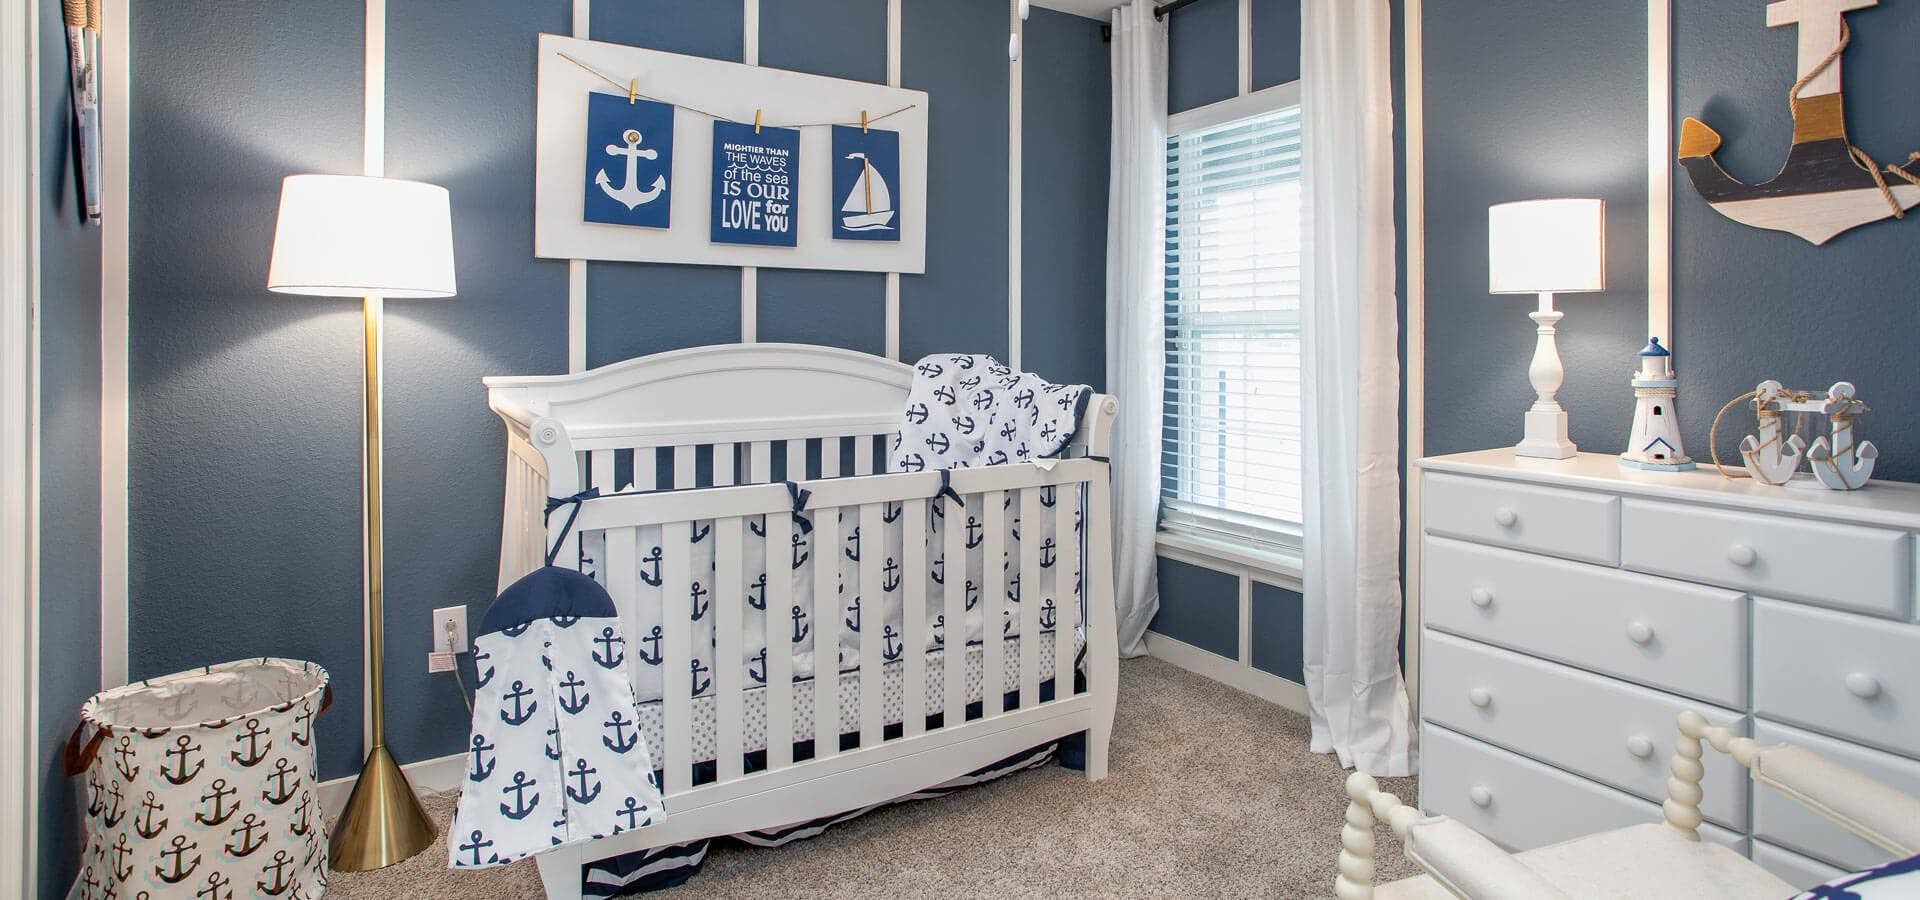 A nursery decorated in blue and white nautical theme